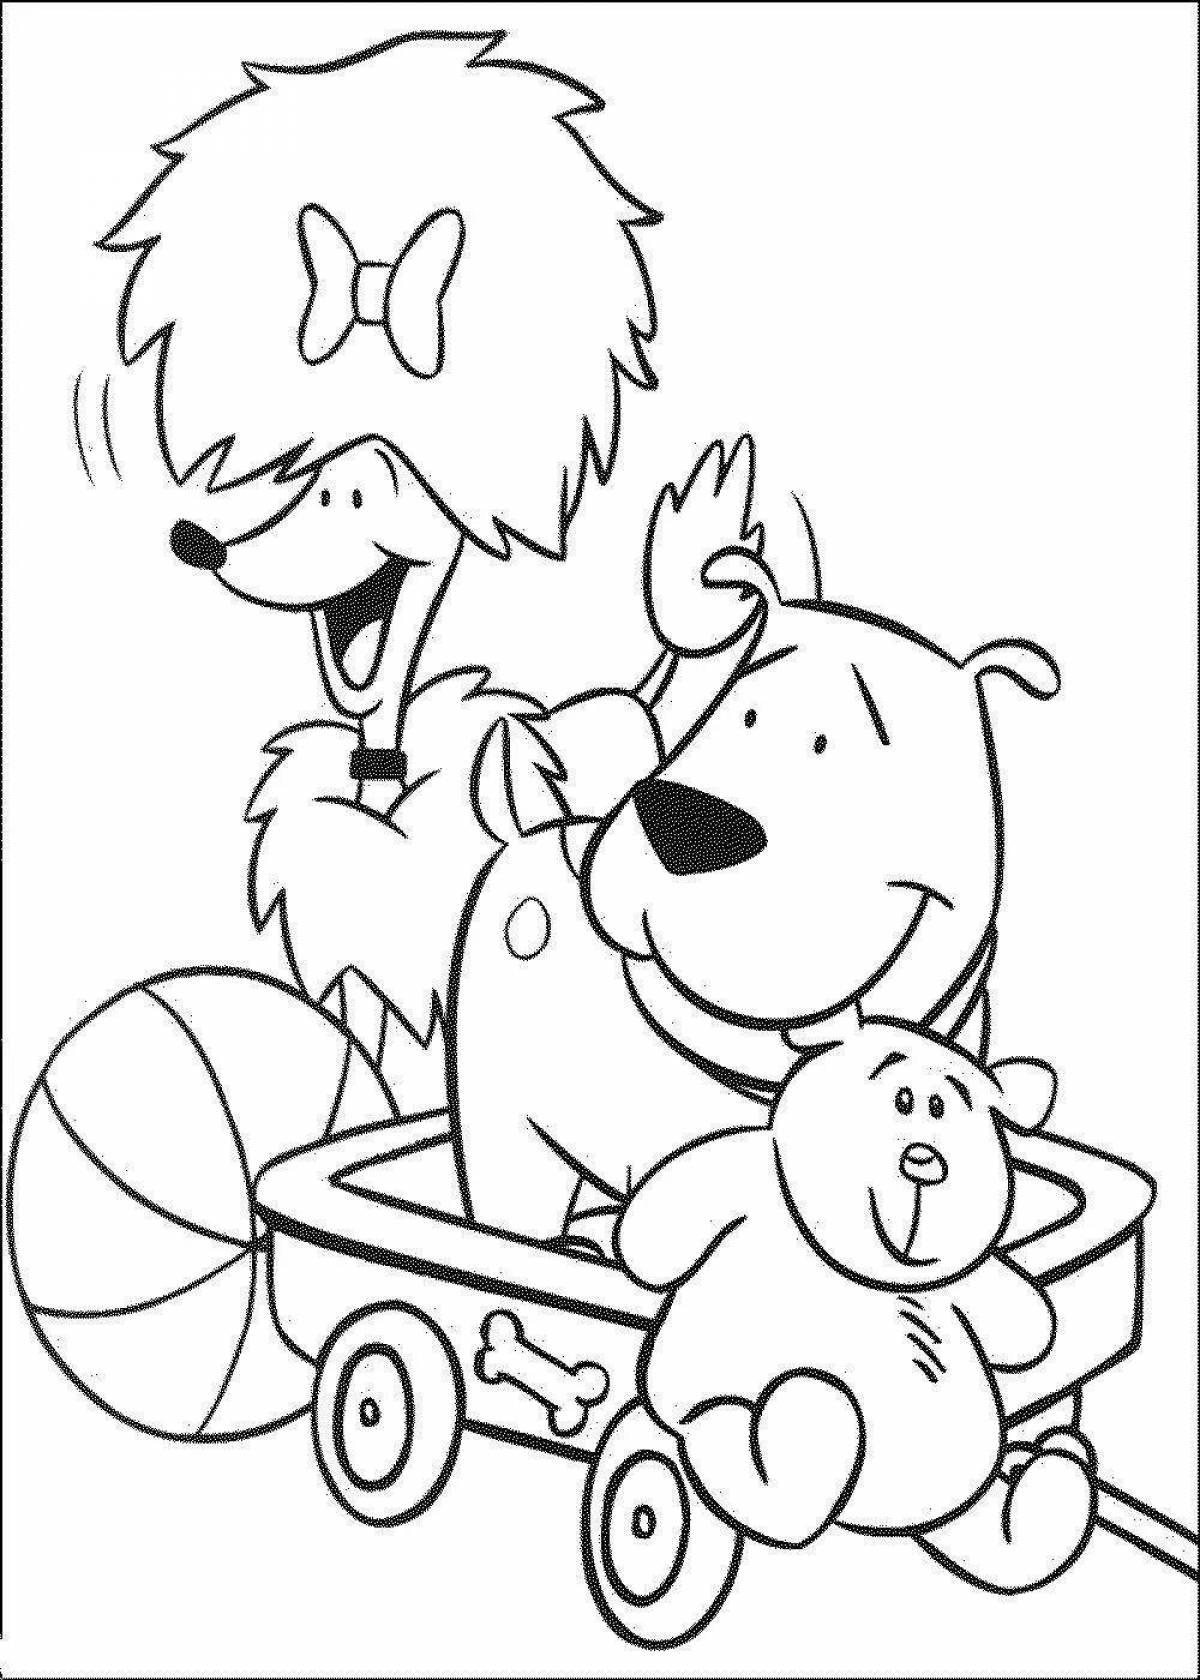 Glowing red friend coloring page